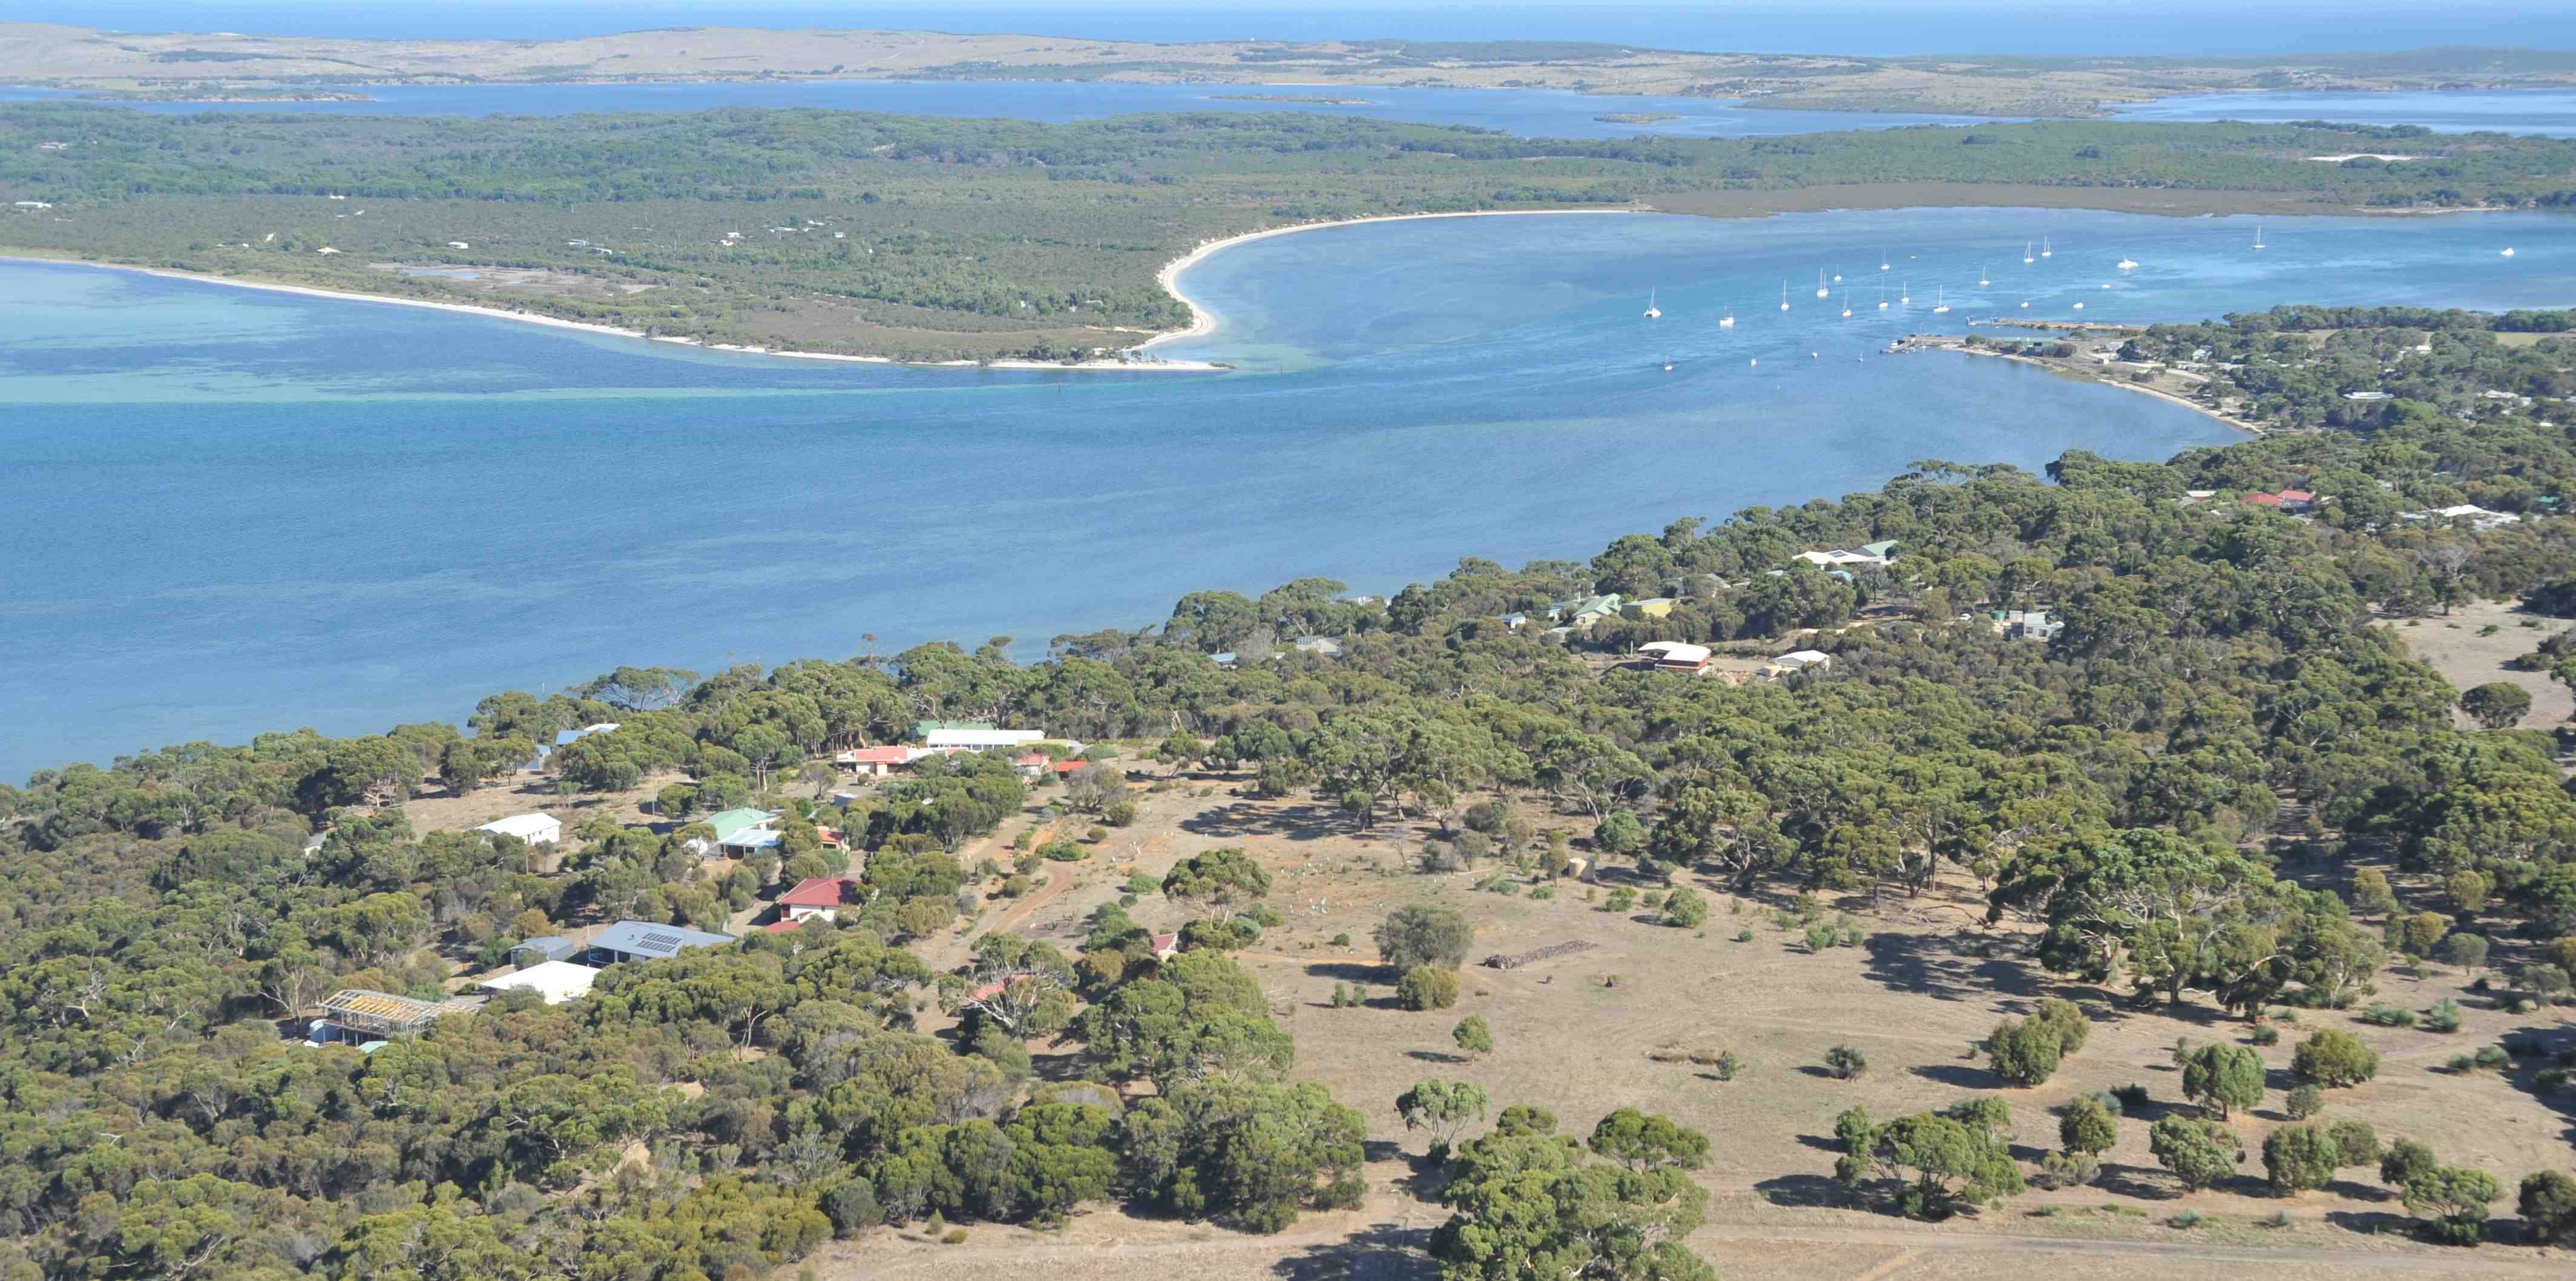 Aerial view on Buddhâyatana and Pelican Lagoon, with the Southern Ocean at the horizon